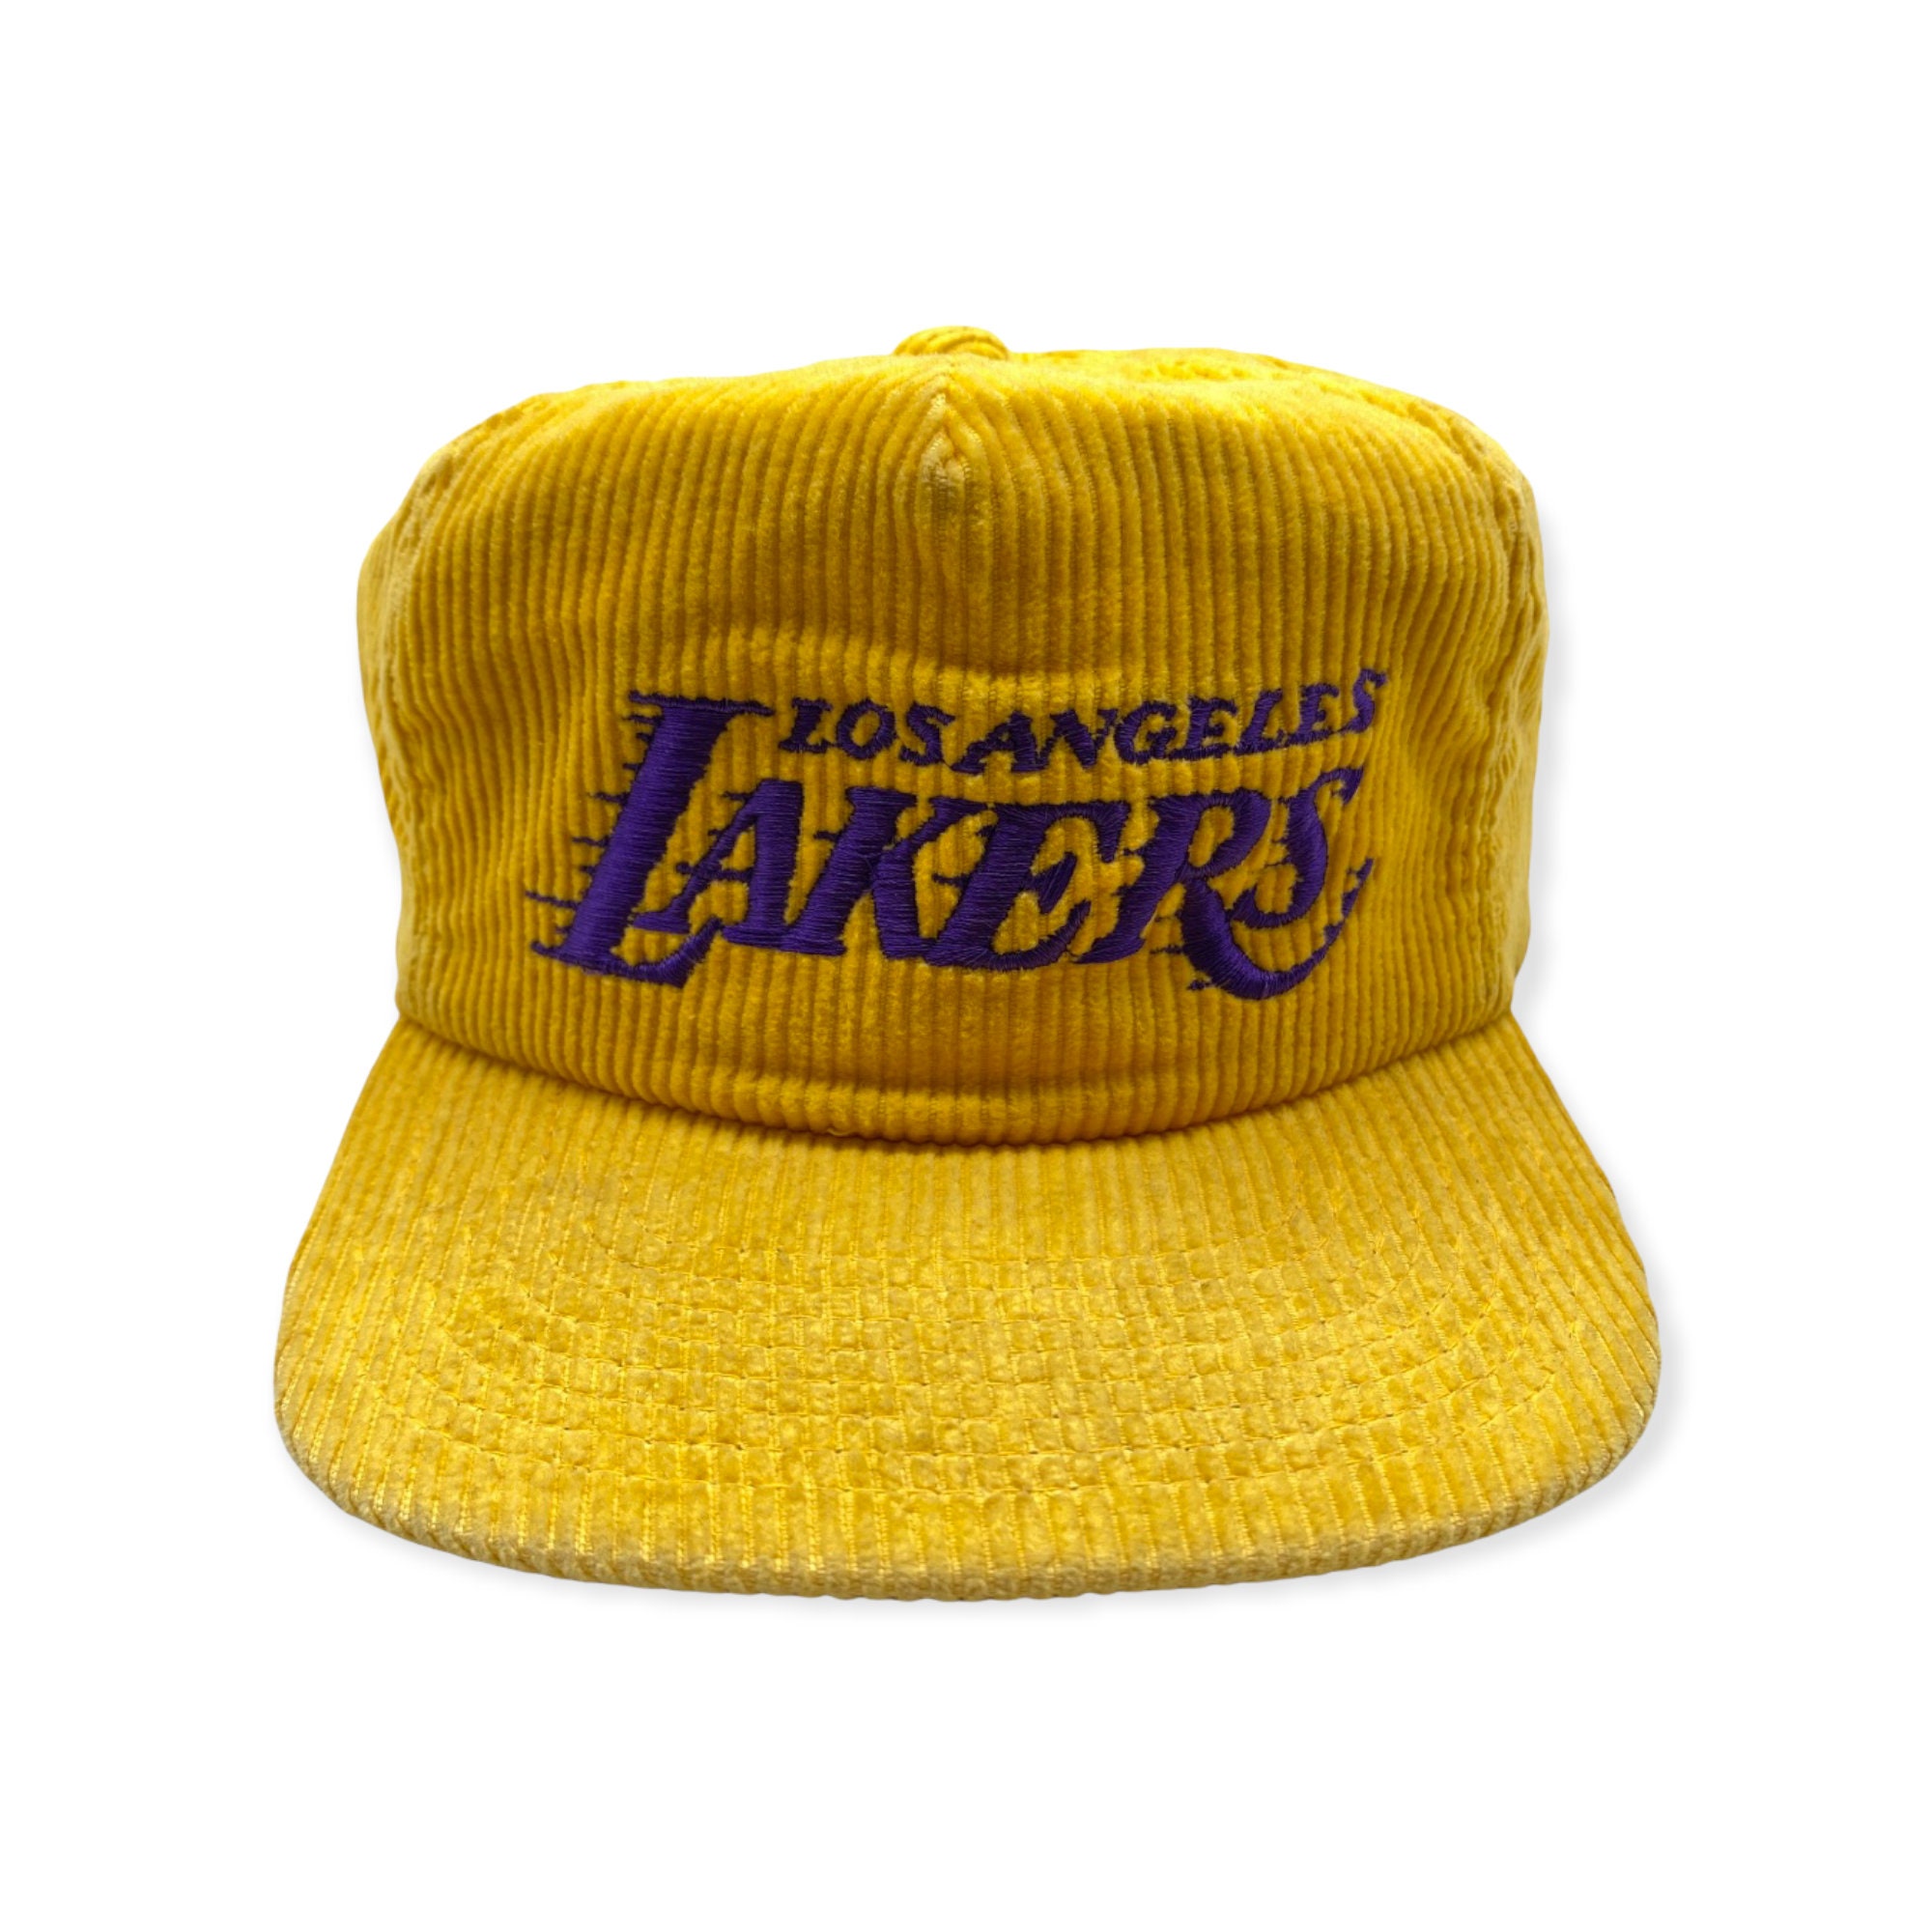 Los Angeles Lakers Vintage Sports Specialties the Cord - Etsy Finland